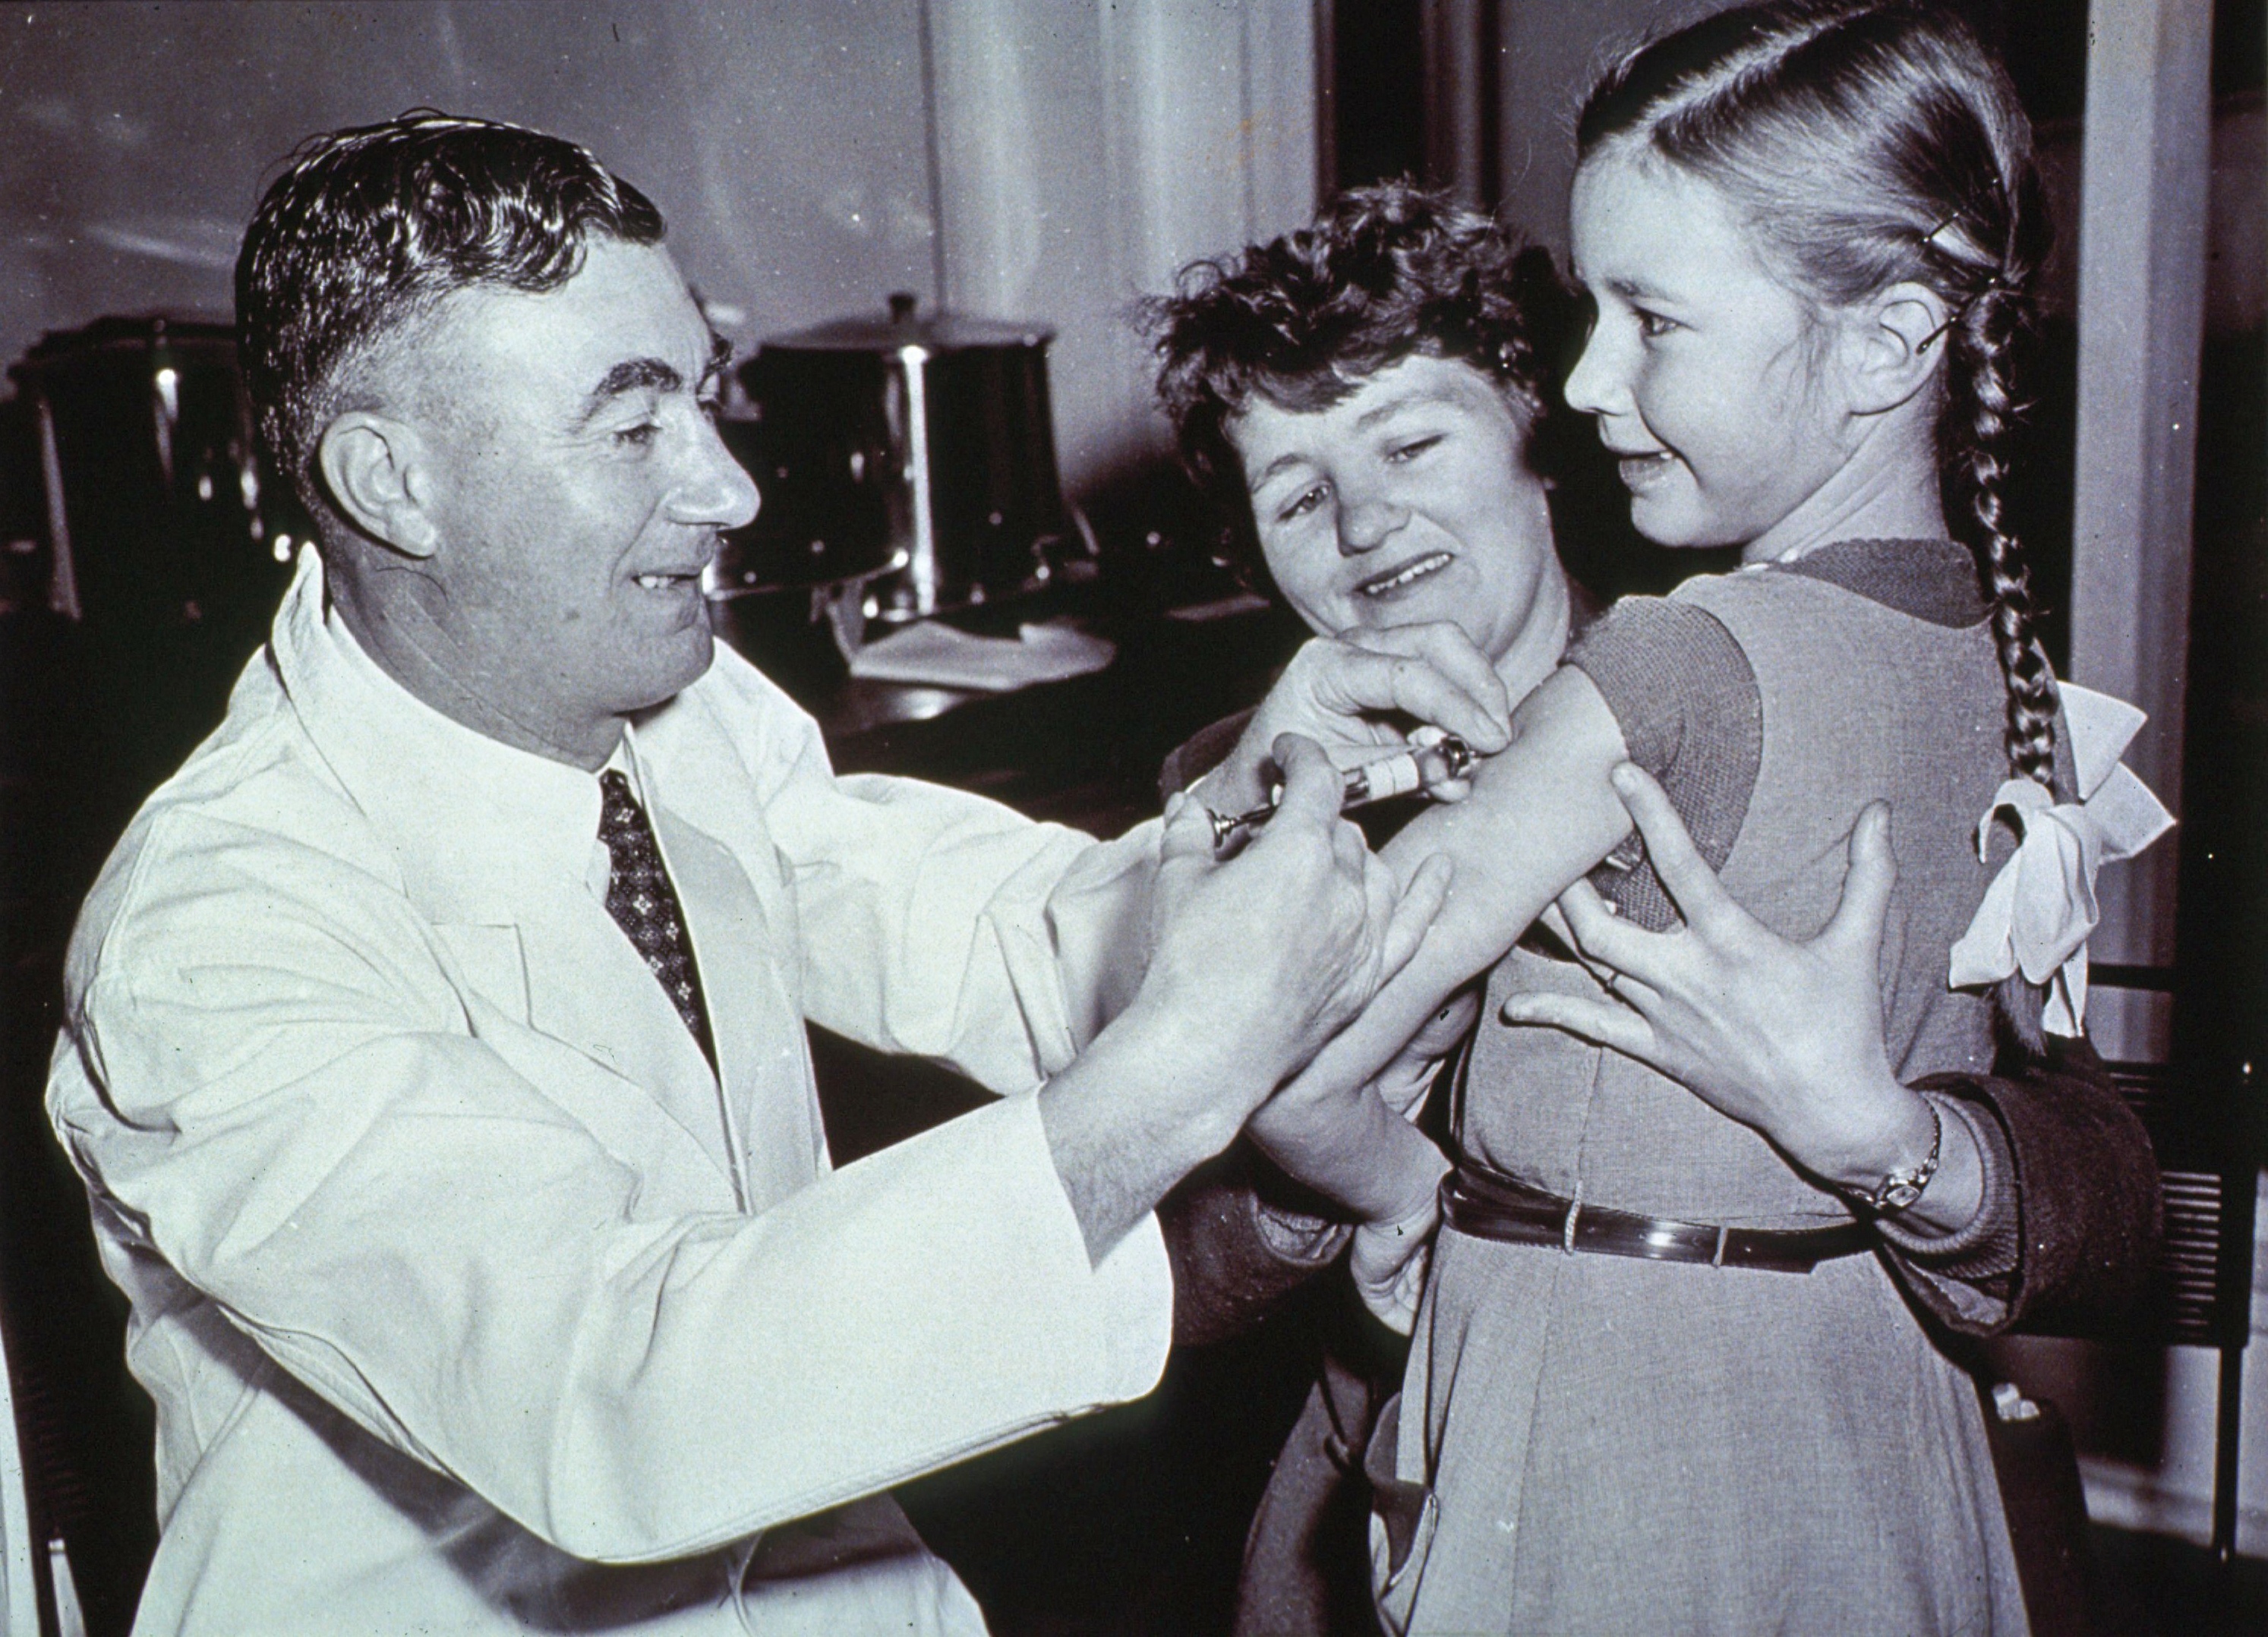 An Australian doctor is vaccinating a girl, who is smiling while a nurse looks on